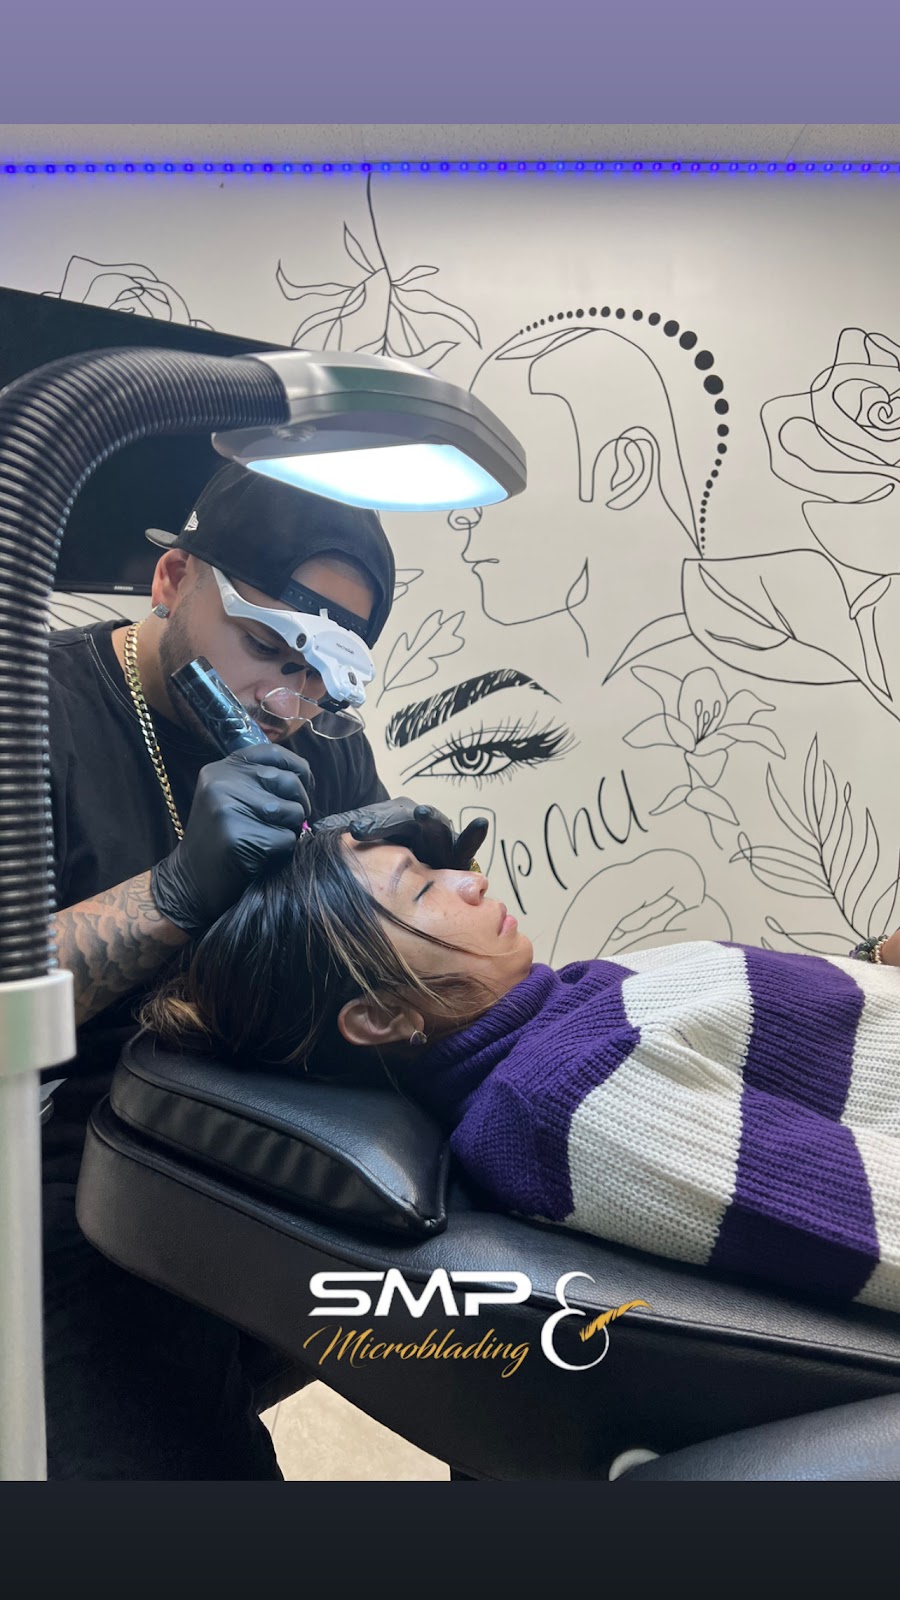 Smp and Microblading | 65-05 Cooper Ave, Queens, NY 11385 | Phone: (929) 866-2059